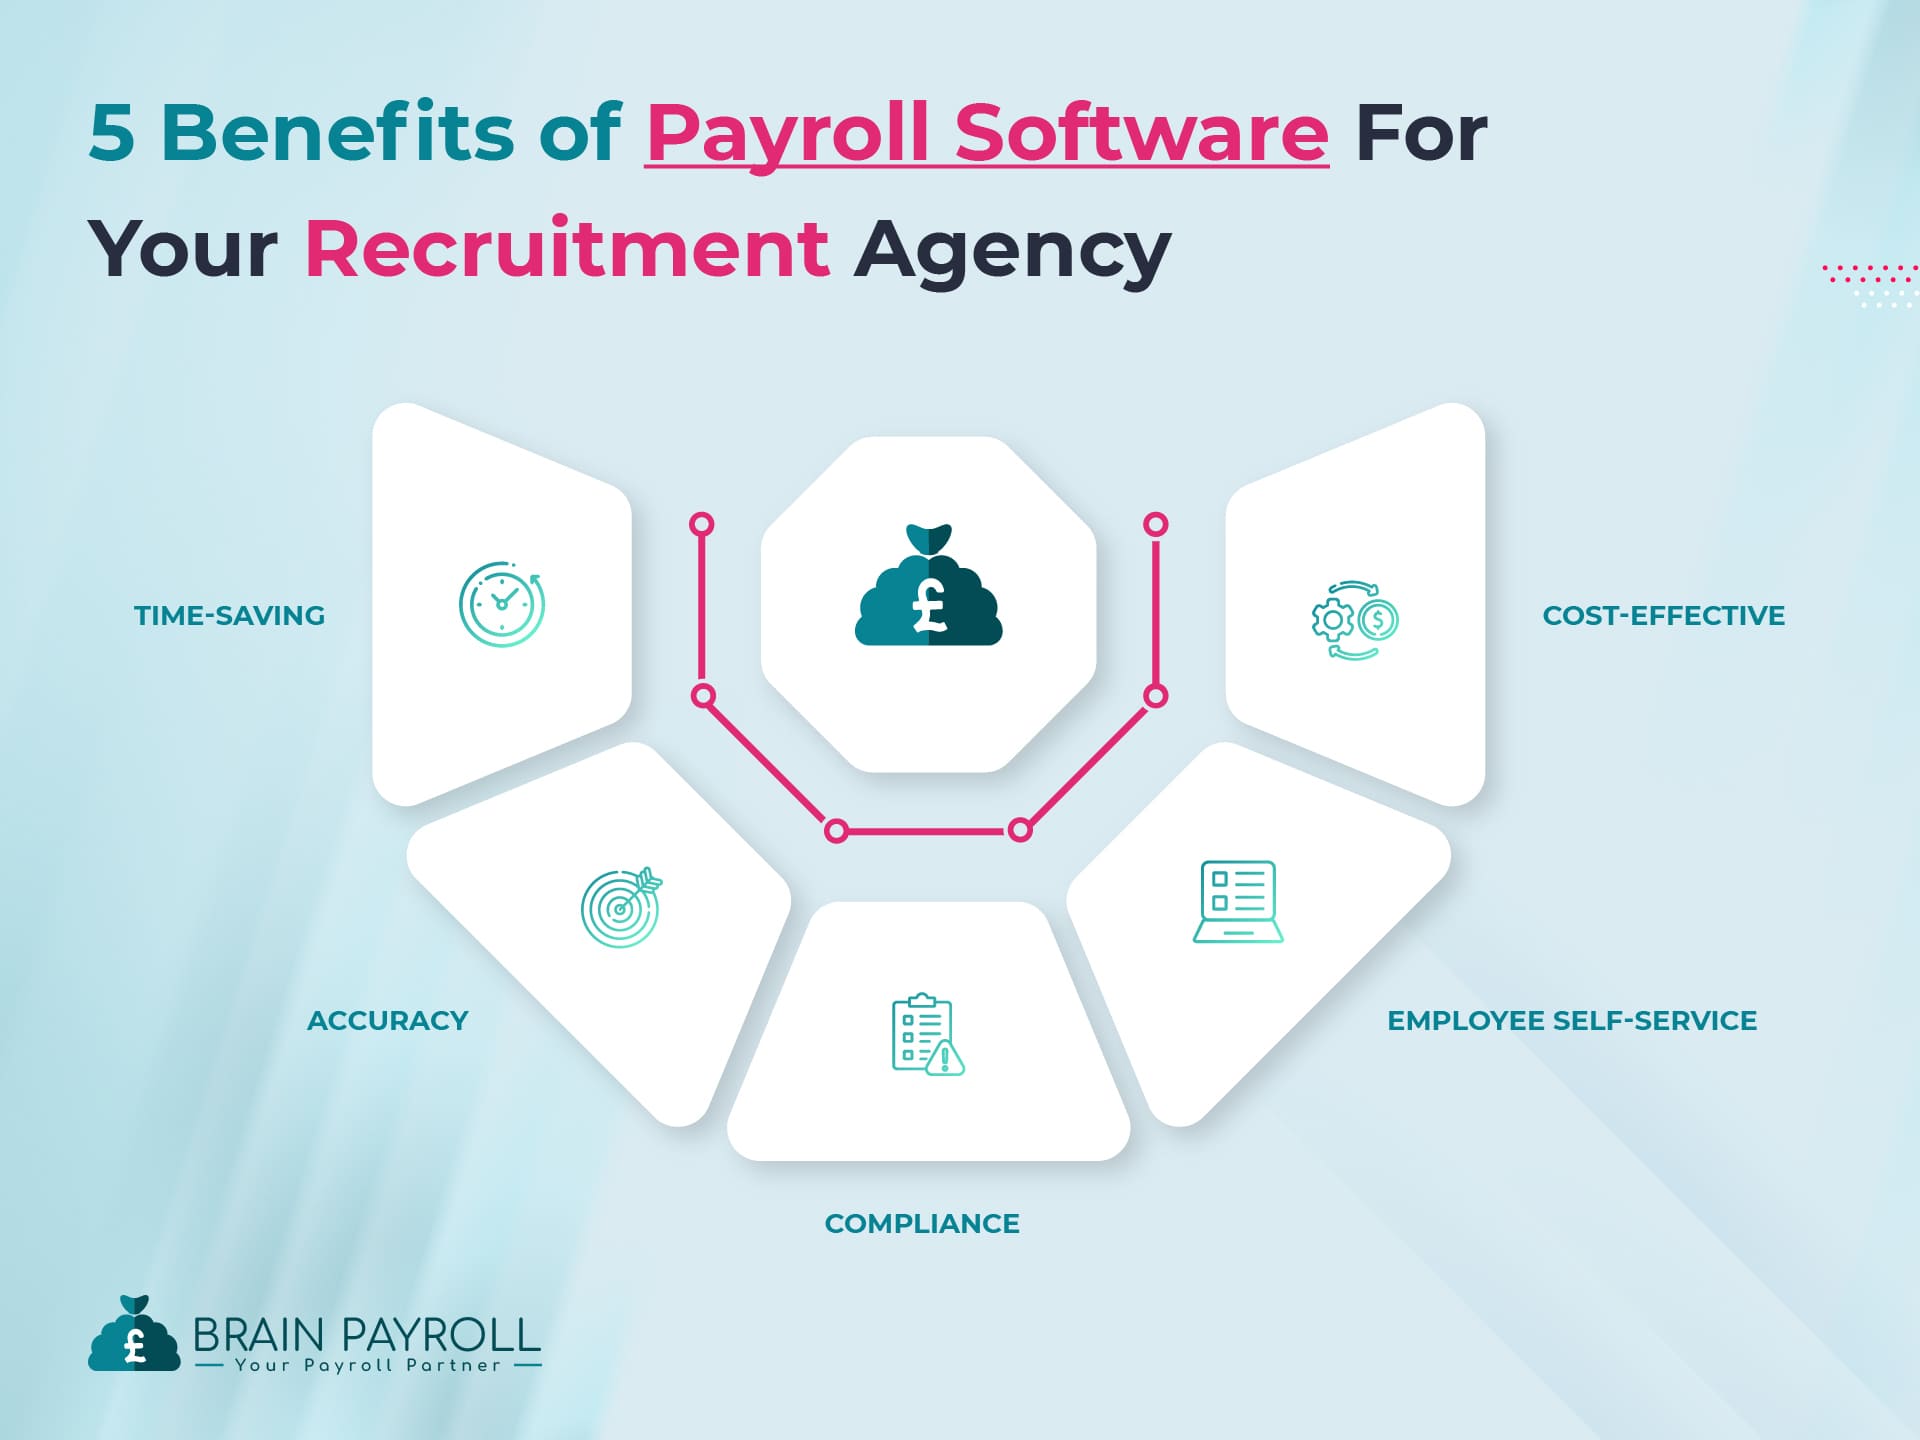 5 Benefits of Using Payroll Software for Your Recruitment Agency